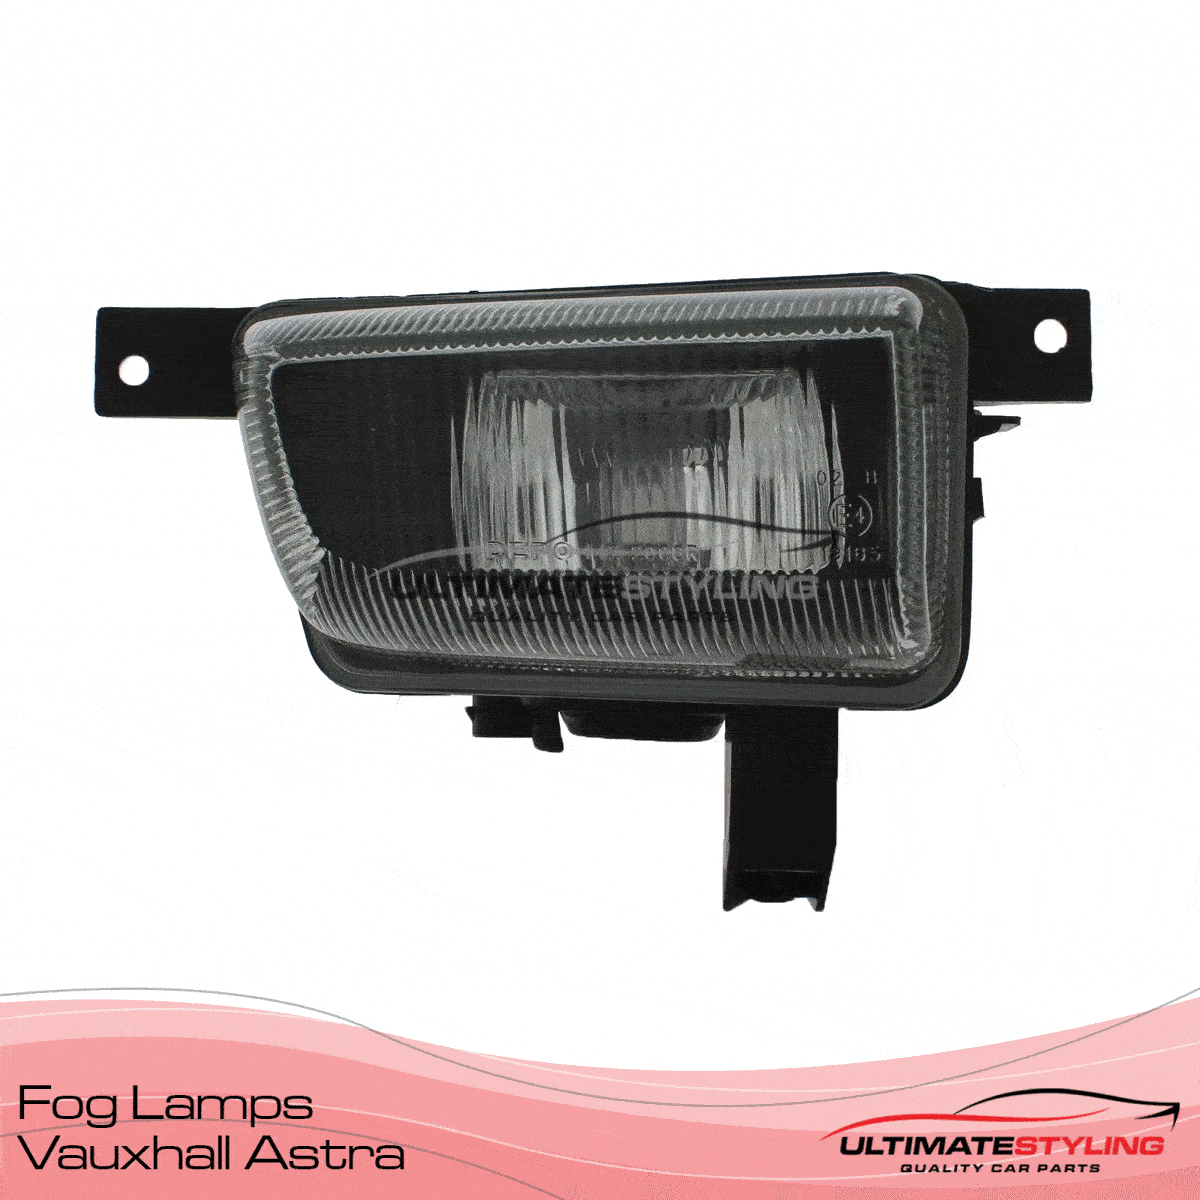 360 view of a Vauxhall Astra Front Fog Light